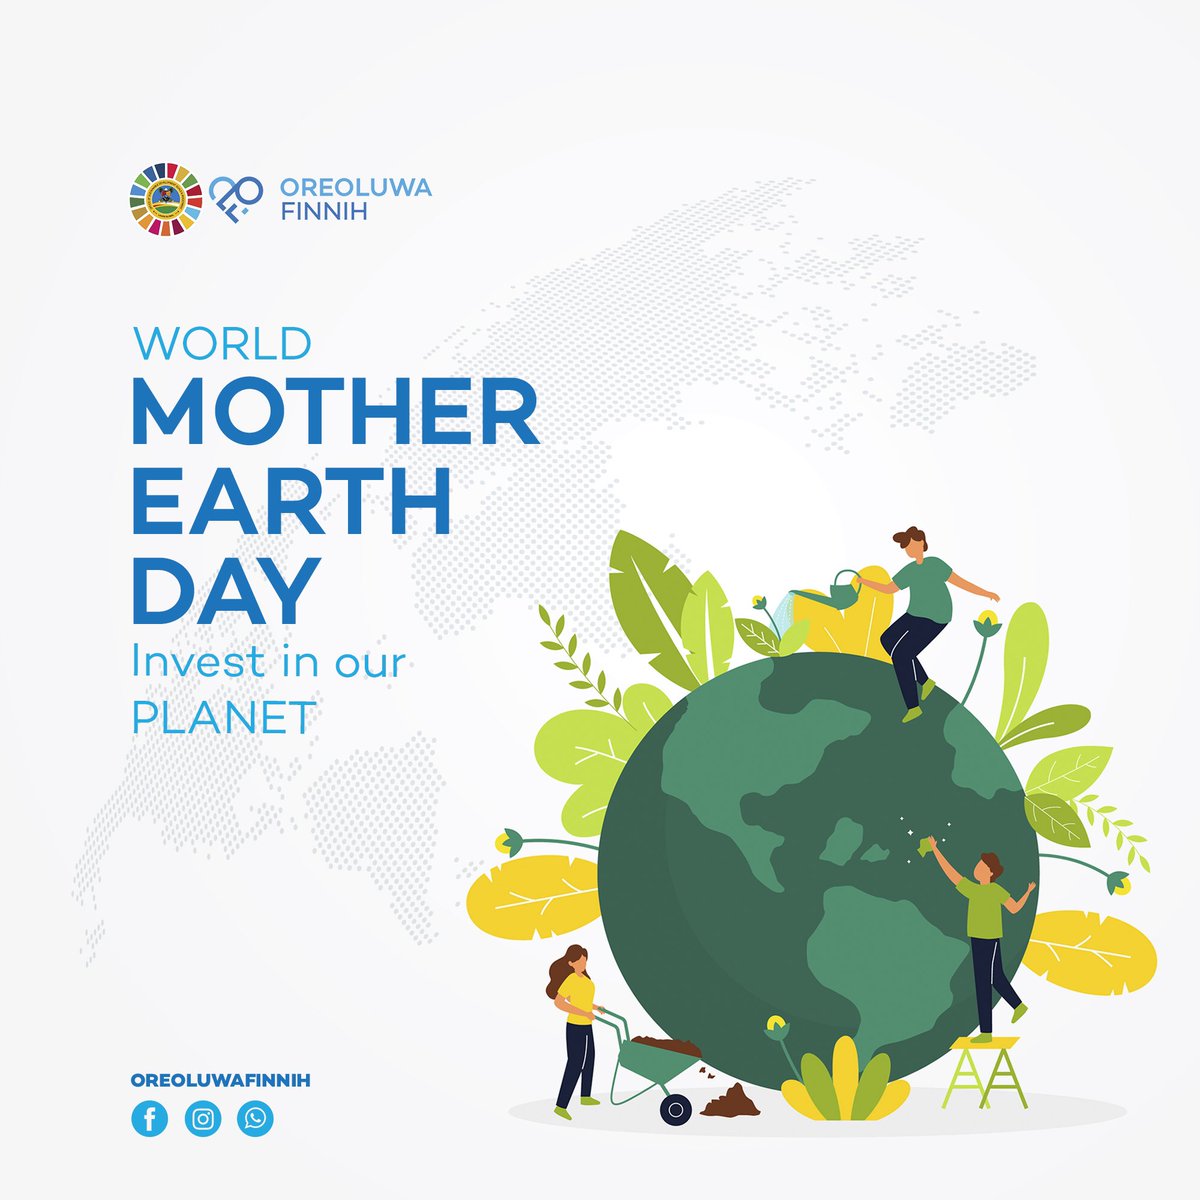 Earth Day Is a day to reflect on the beauty of nature, but also on the urgent need to protect it. From local clean-up campaigns to international climate summits, Earth Day inspires action at all levels to promote environmental sustainability and preserve the delicate balance of…